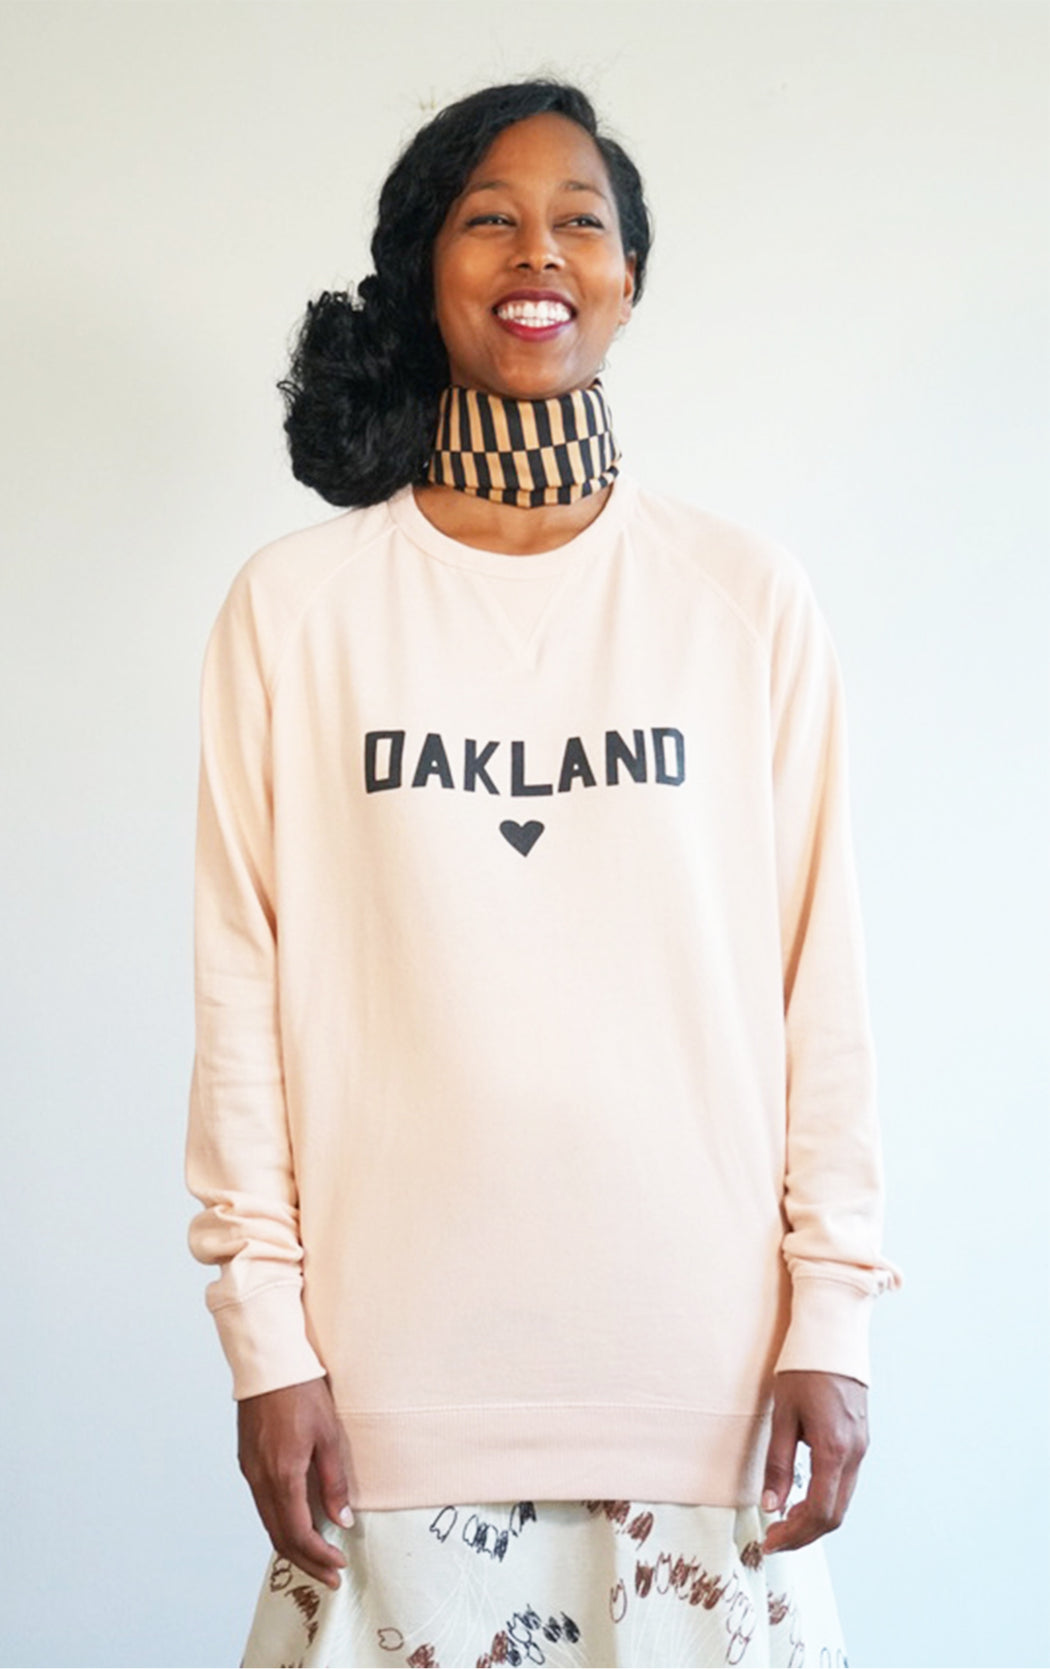 pink super soft love oakland sweatshirt in a cool crew neck style made in a soft cotton blend with love oakland heart graphic on front 